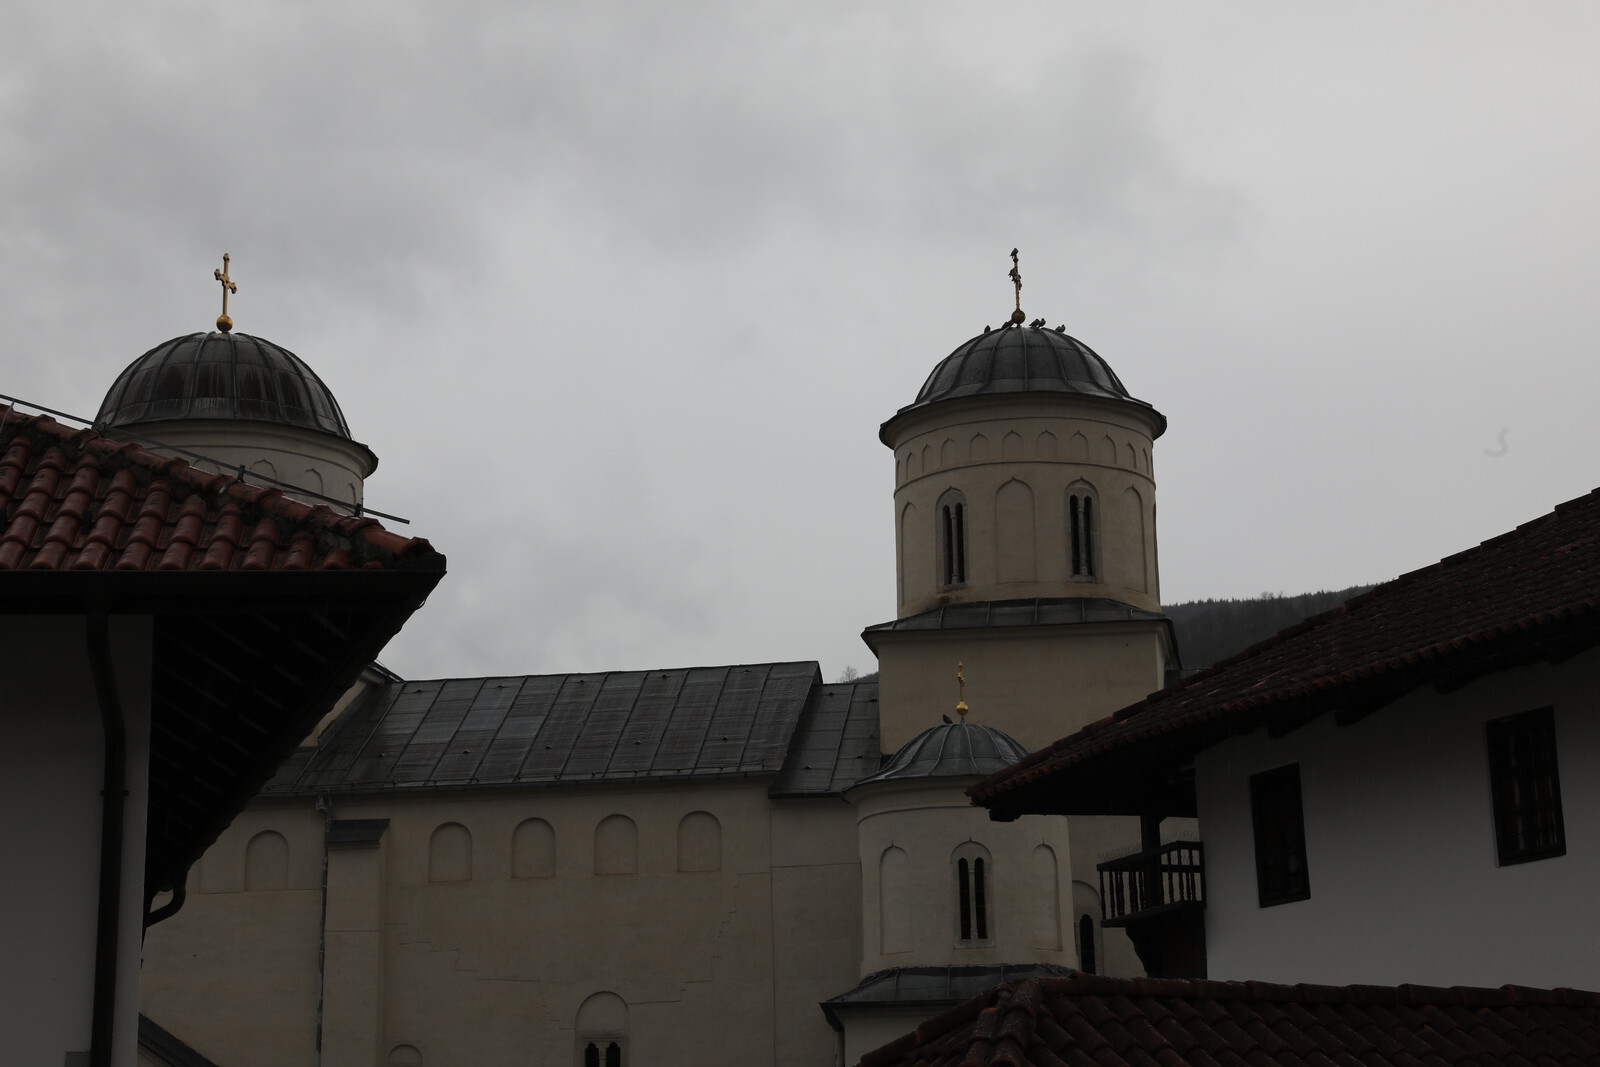 Rooftops of the church and living quarters